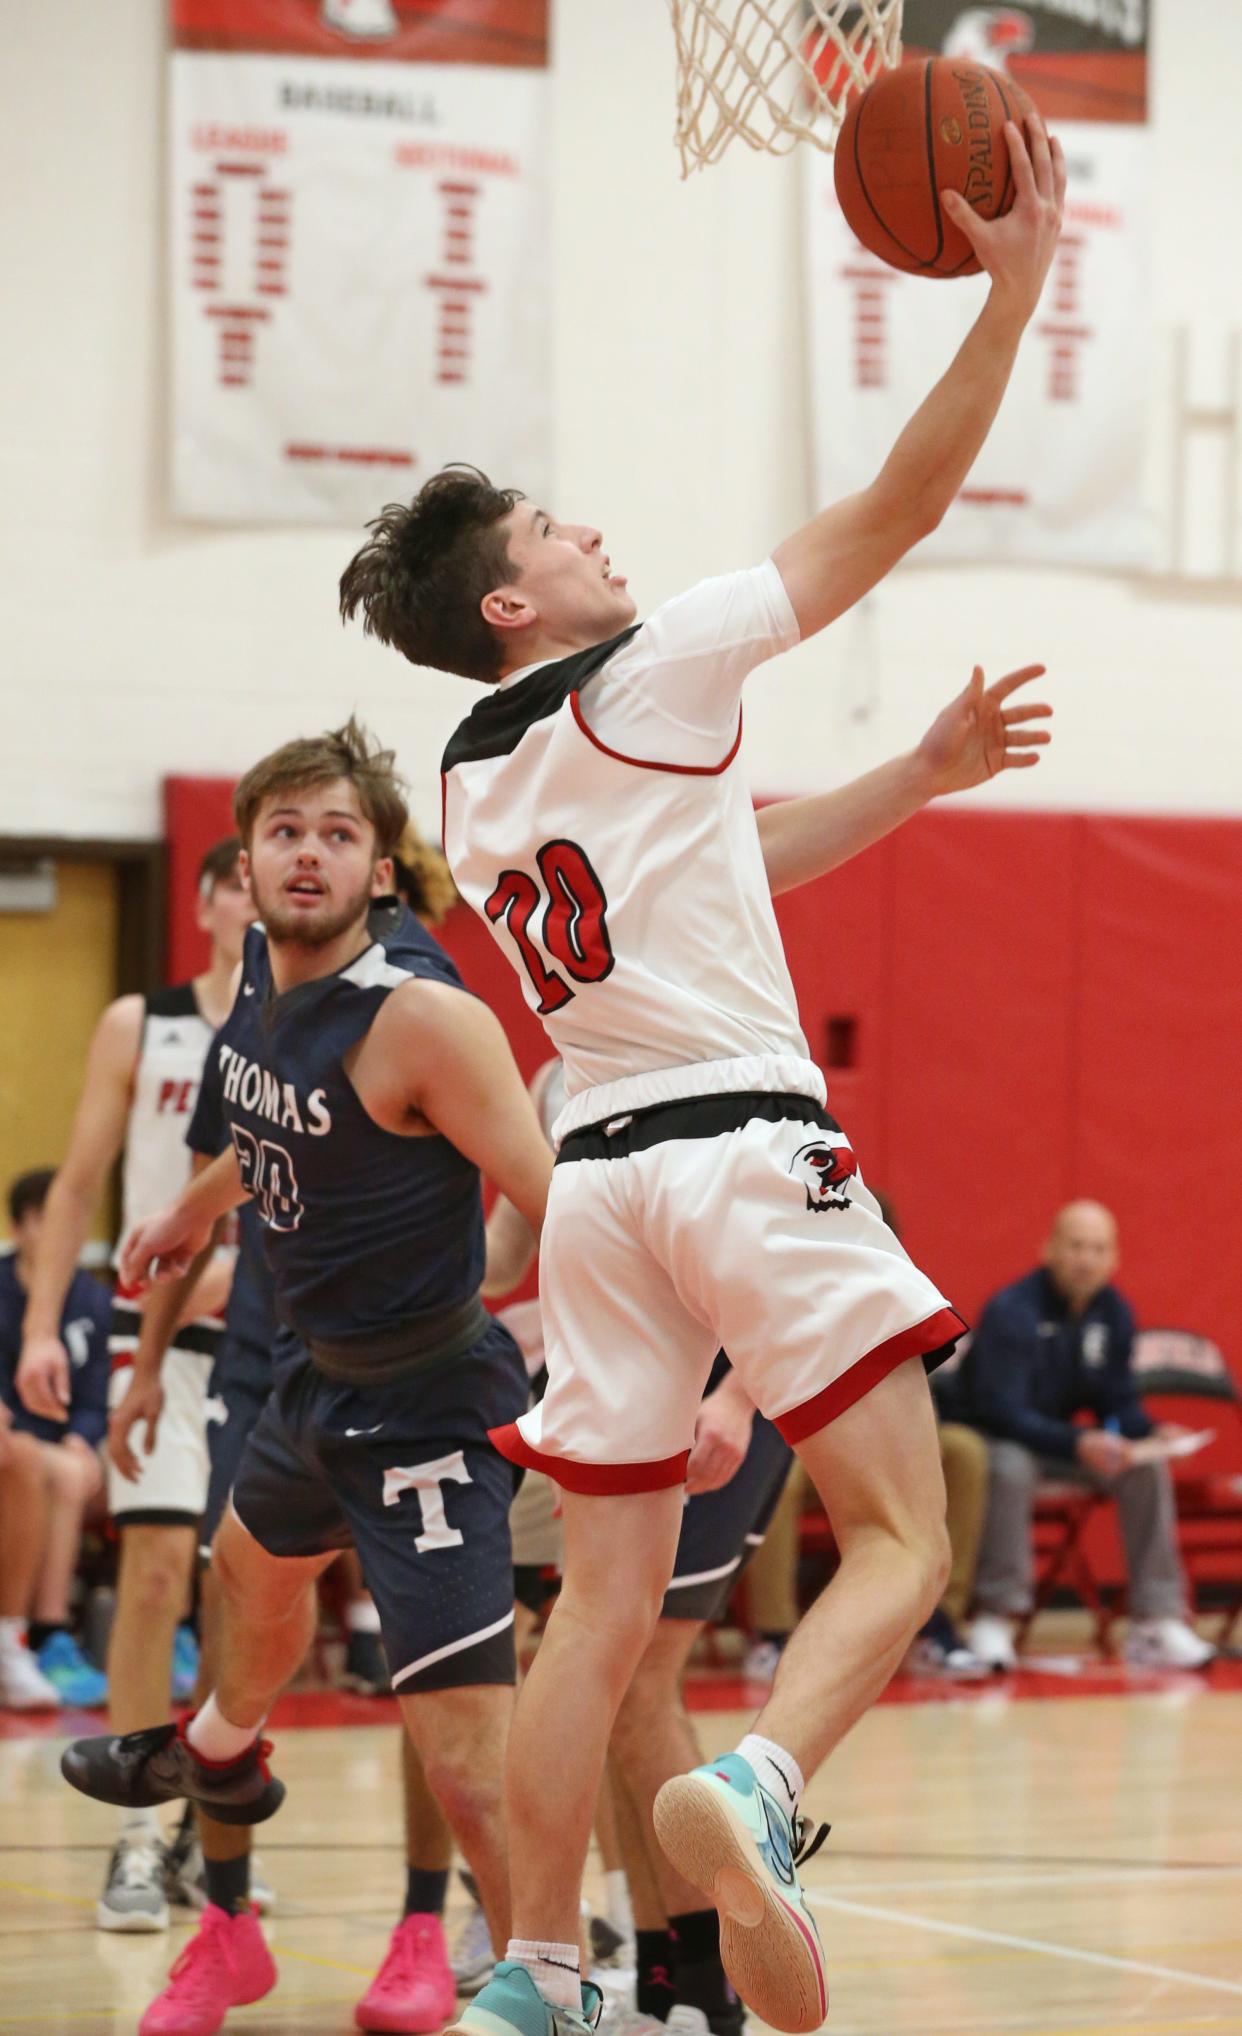 Penfield's Trevor Hofer (20), puts up a reverse layup past Thomas' Shane Talbot during their Section V boys basketball matchup Tuesday, Jan. 3, 2023 at Penfield High School.